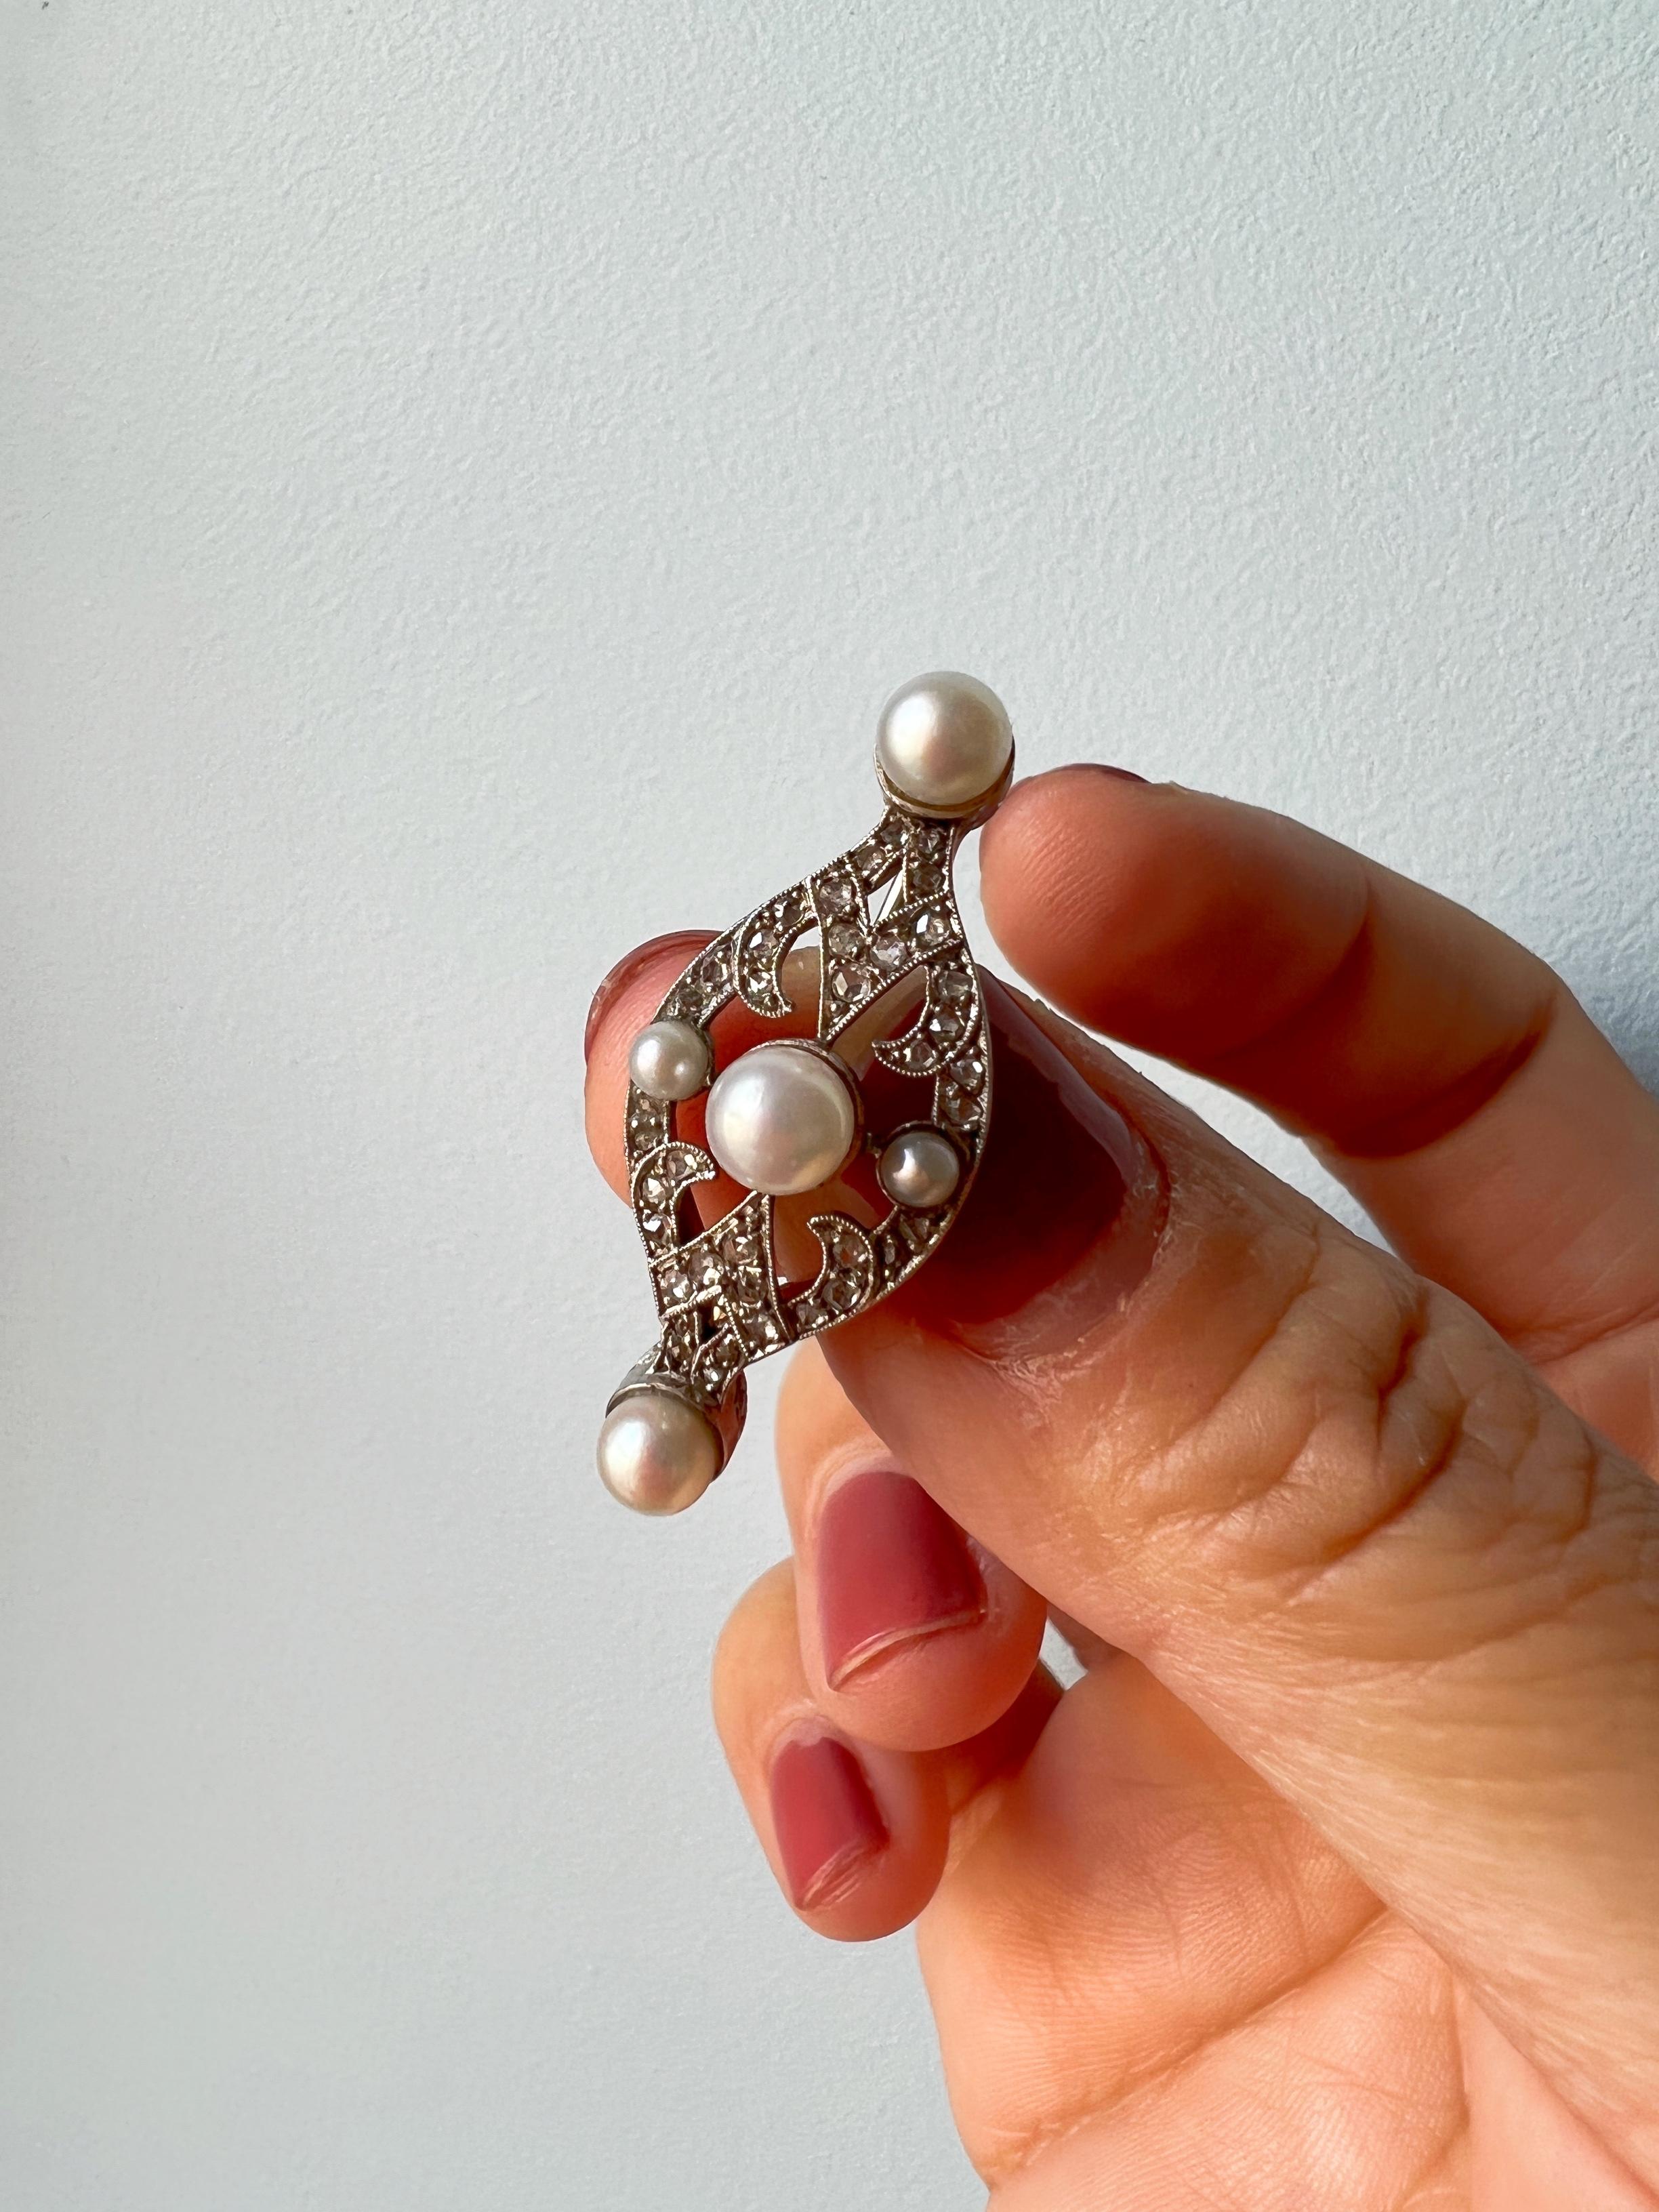 Elegant Art Deco 18K White Gold Diamond Pearl Brooch In Good Condition For Sale In Versailles, FR